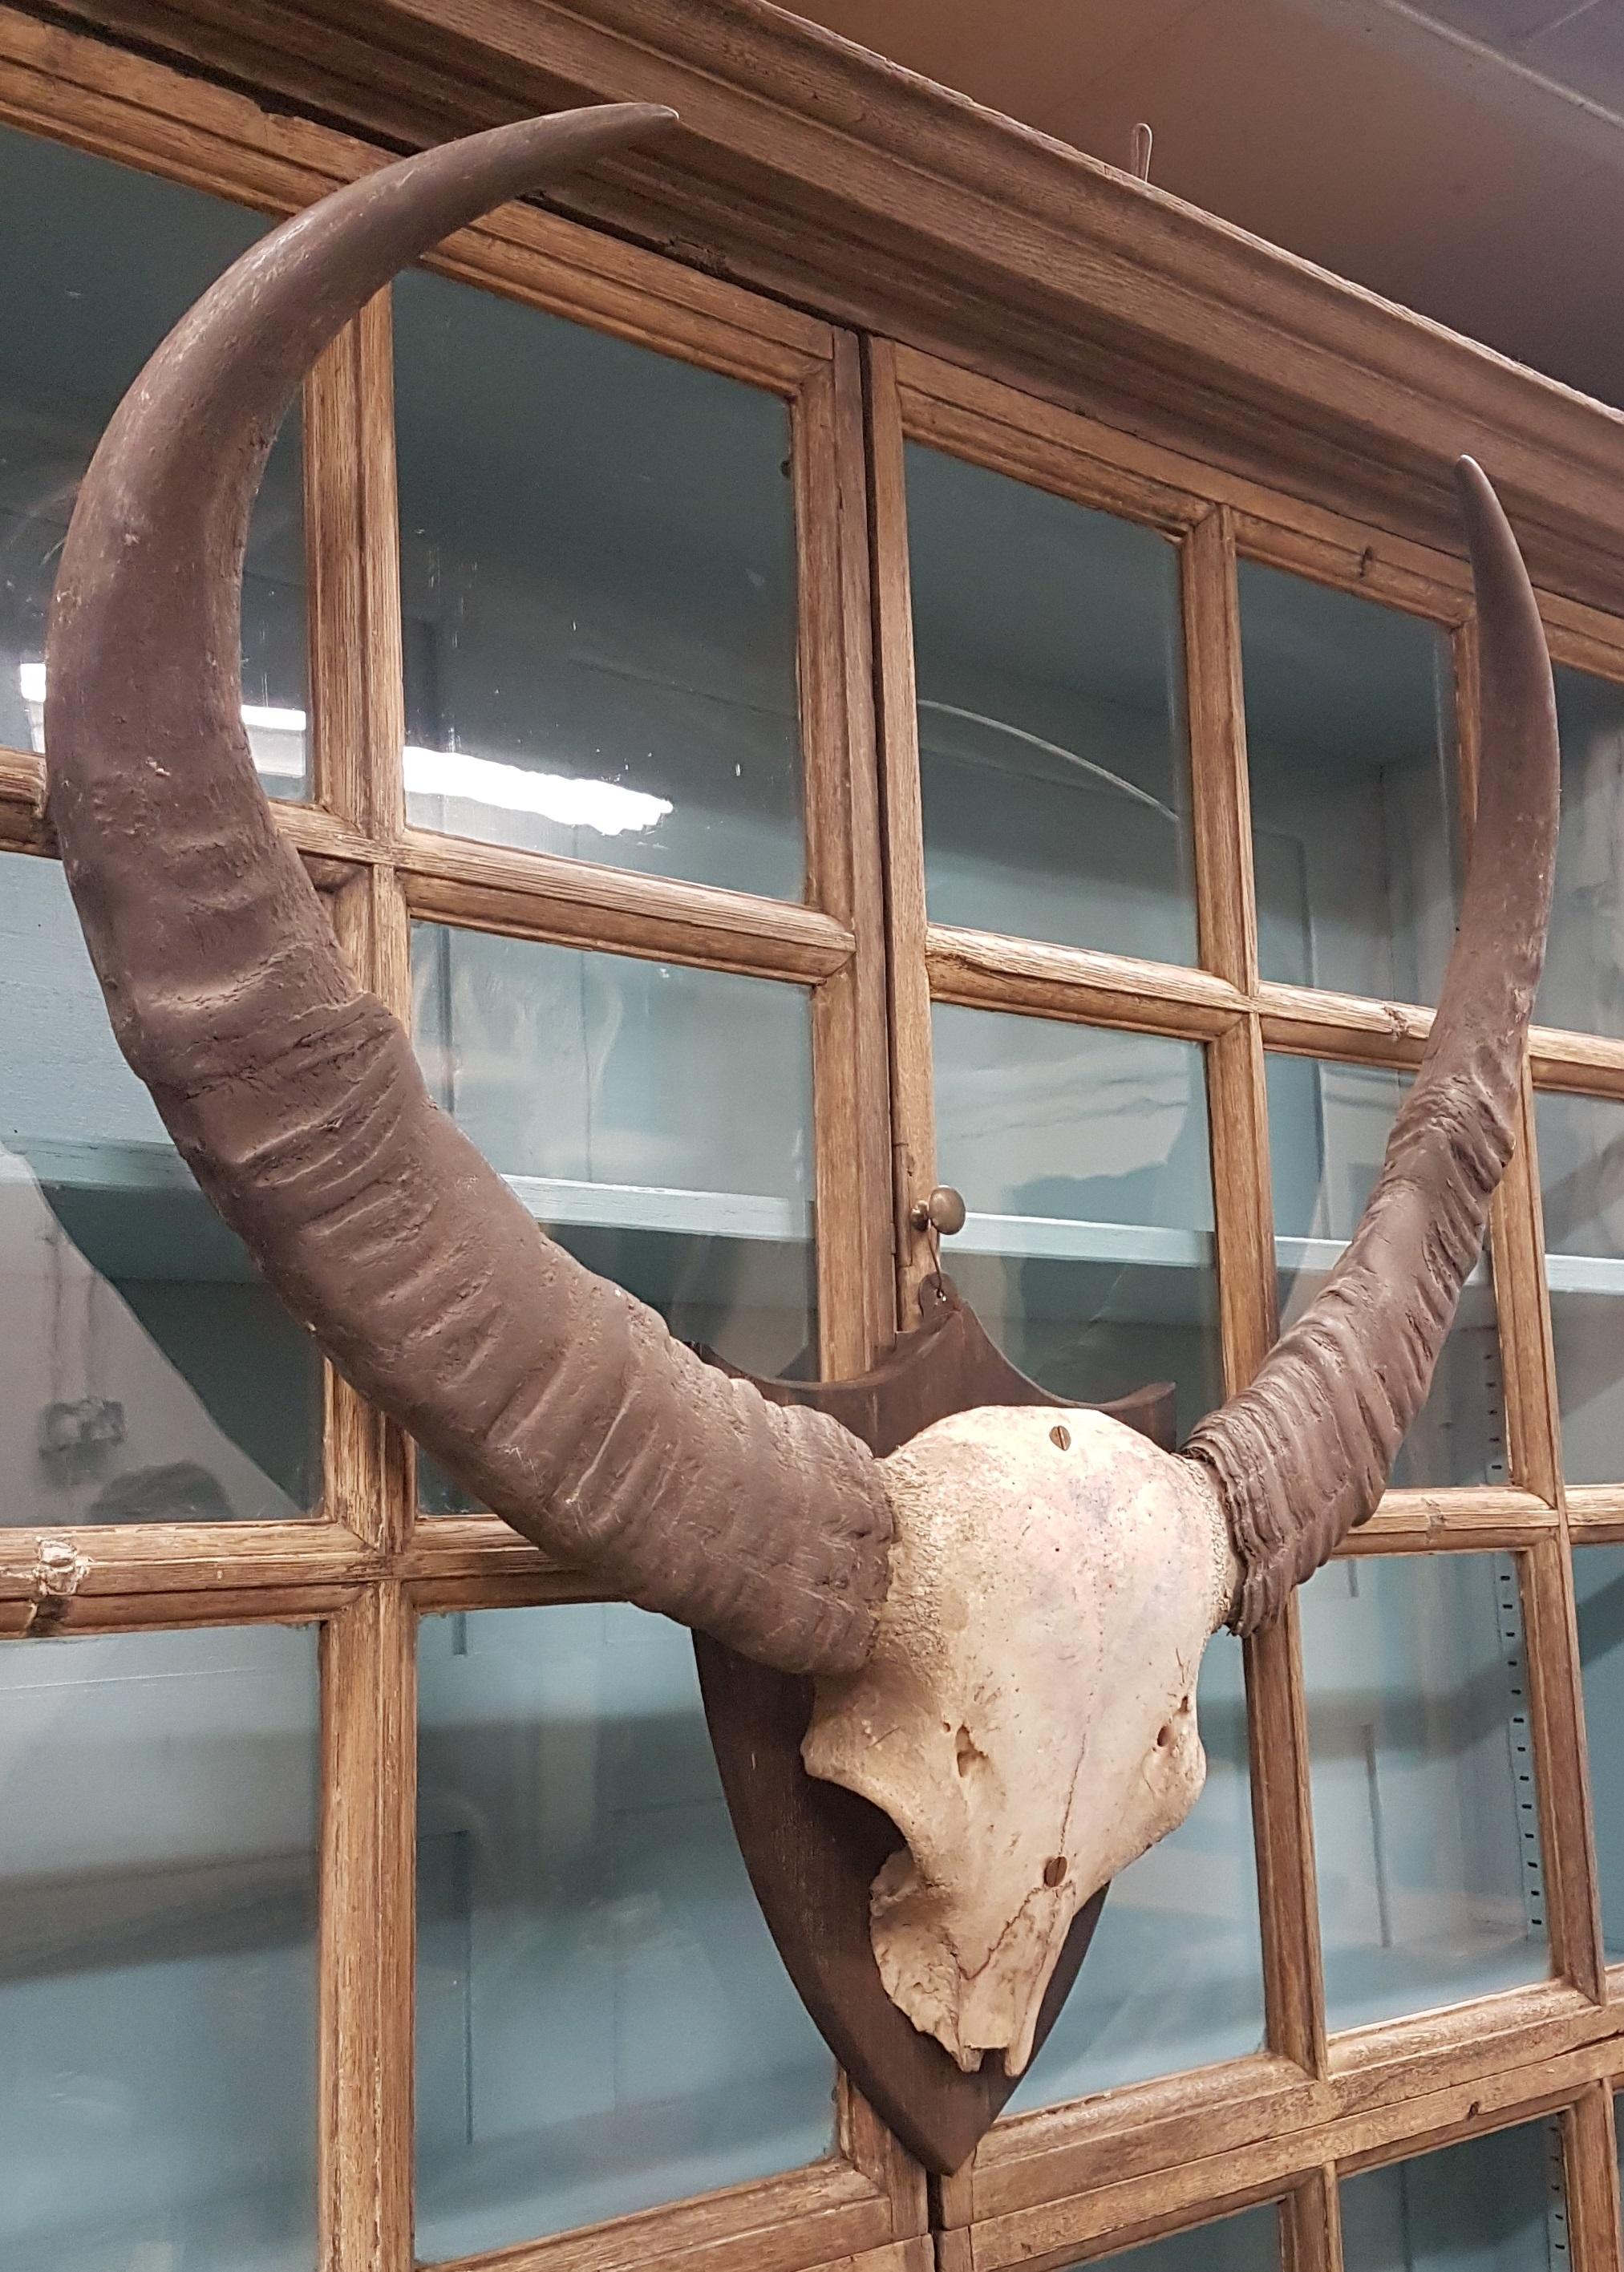 An impressive rustic weathered set of late 19th century water buffalo horns and skull cap. They have gathered a nice faded patina over time and are mounted on an elm shield.
Would look great in a bar, cafe, hunting lodge etc.